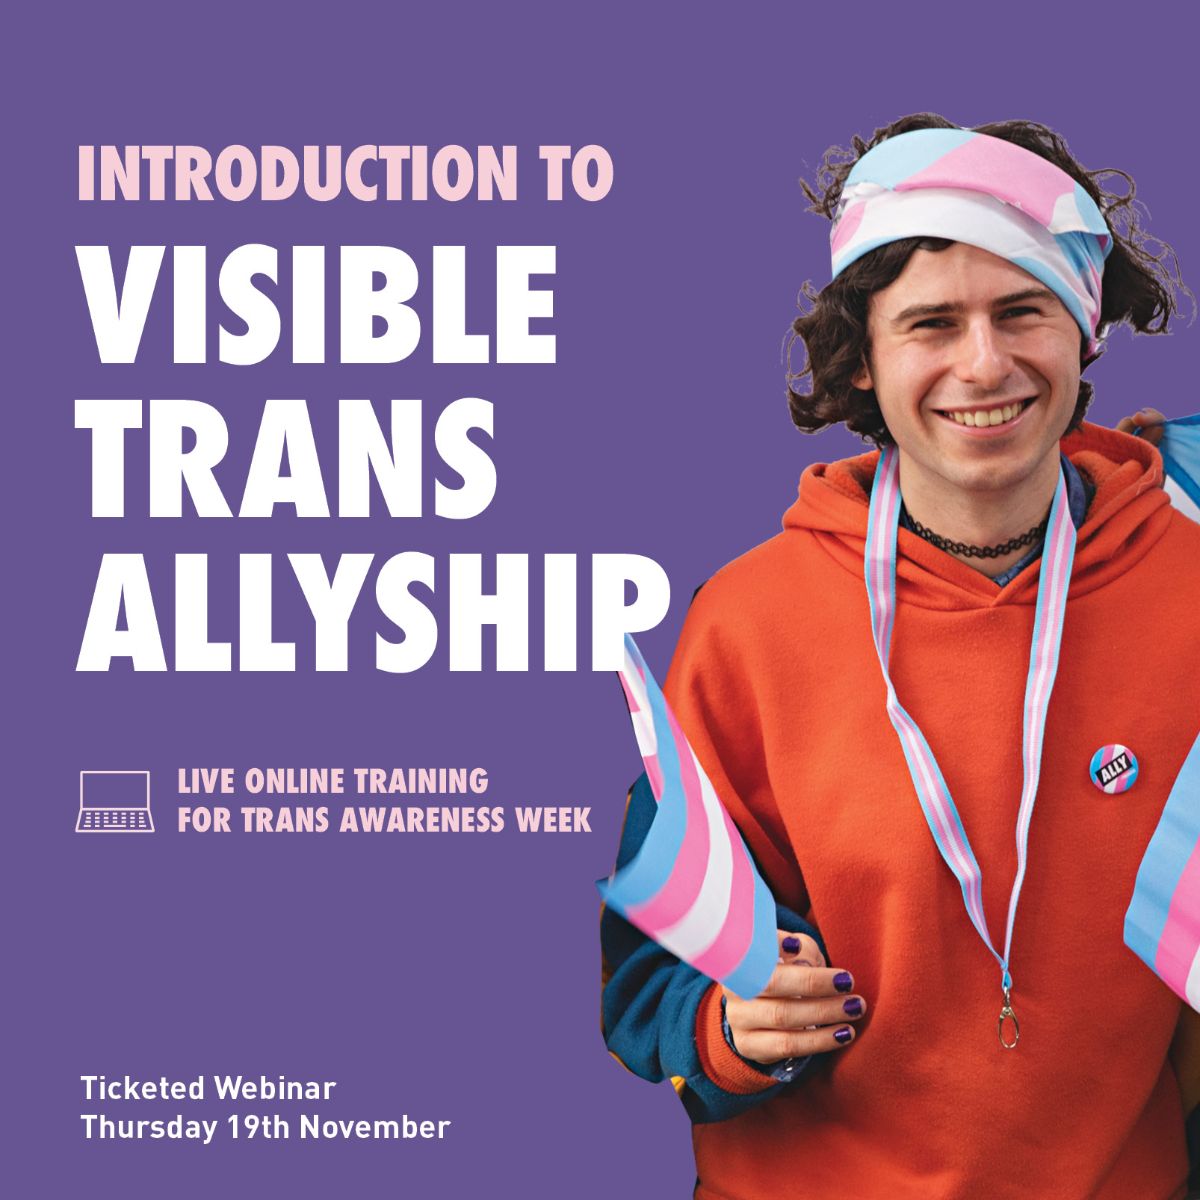 Introduction to Visible Trans Allyship